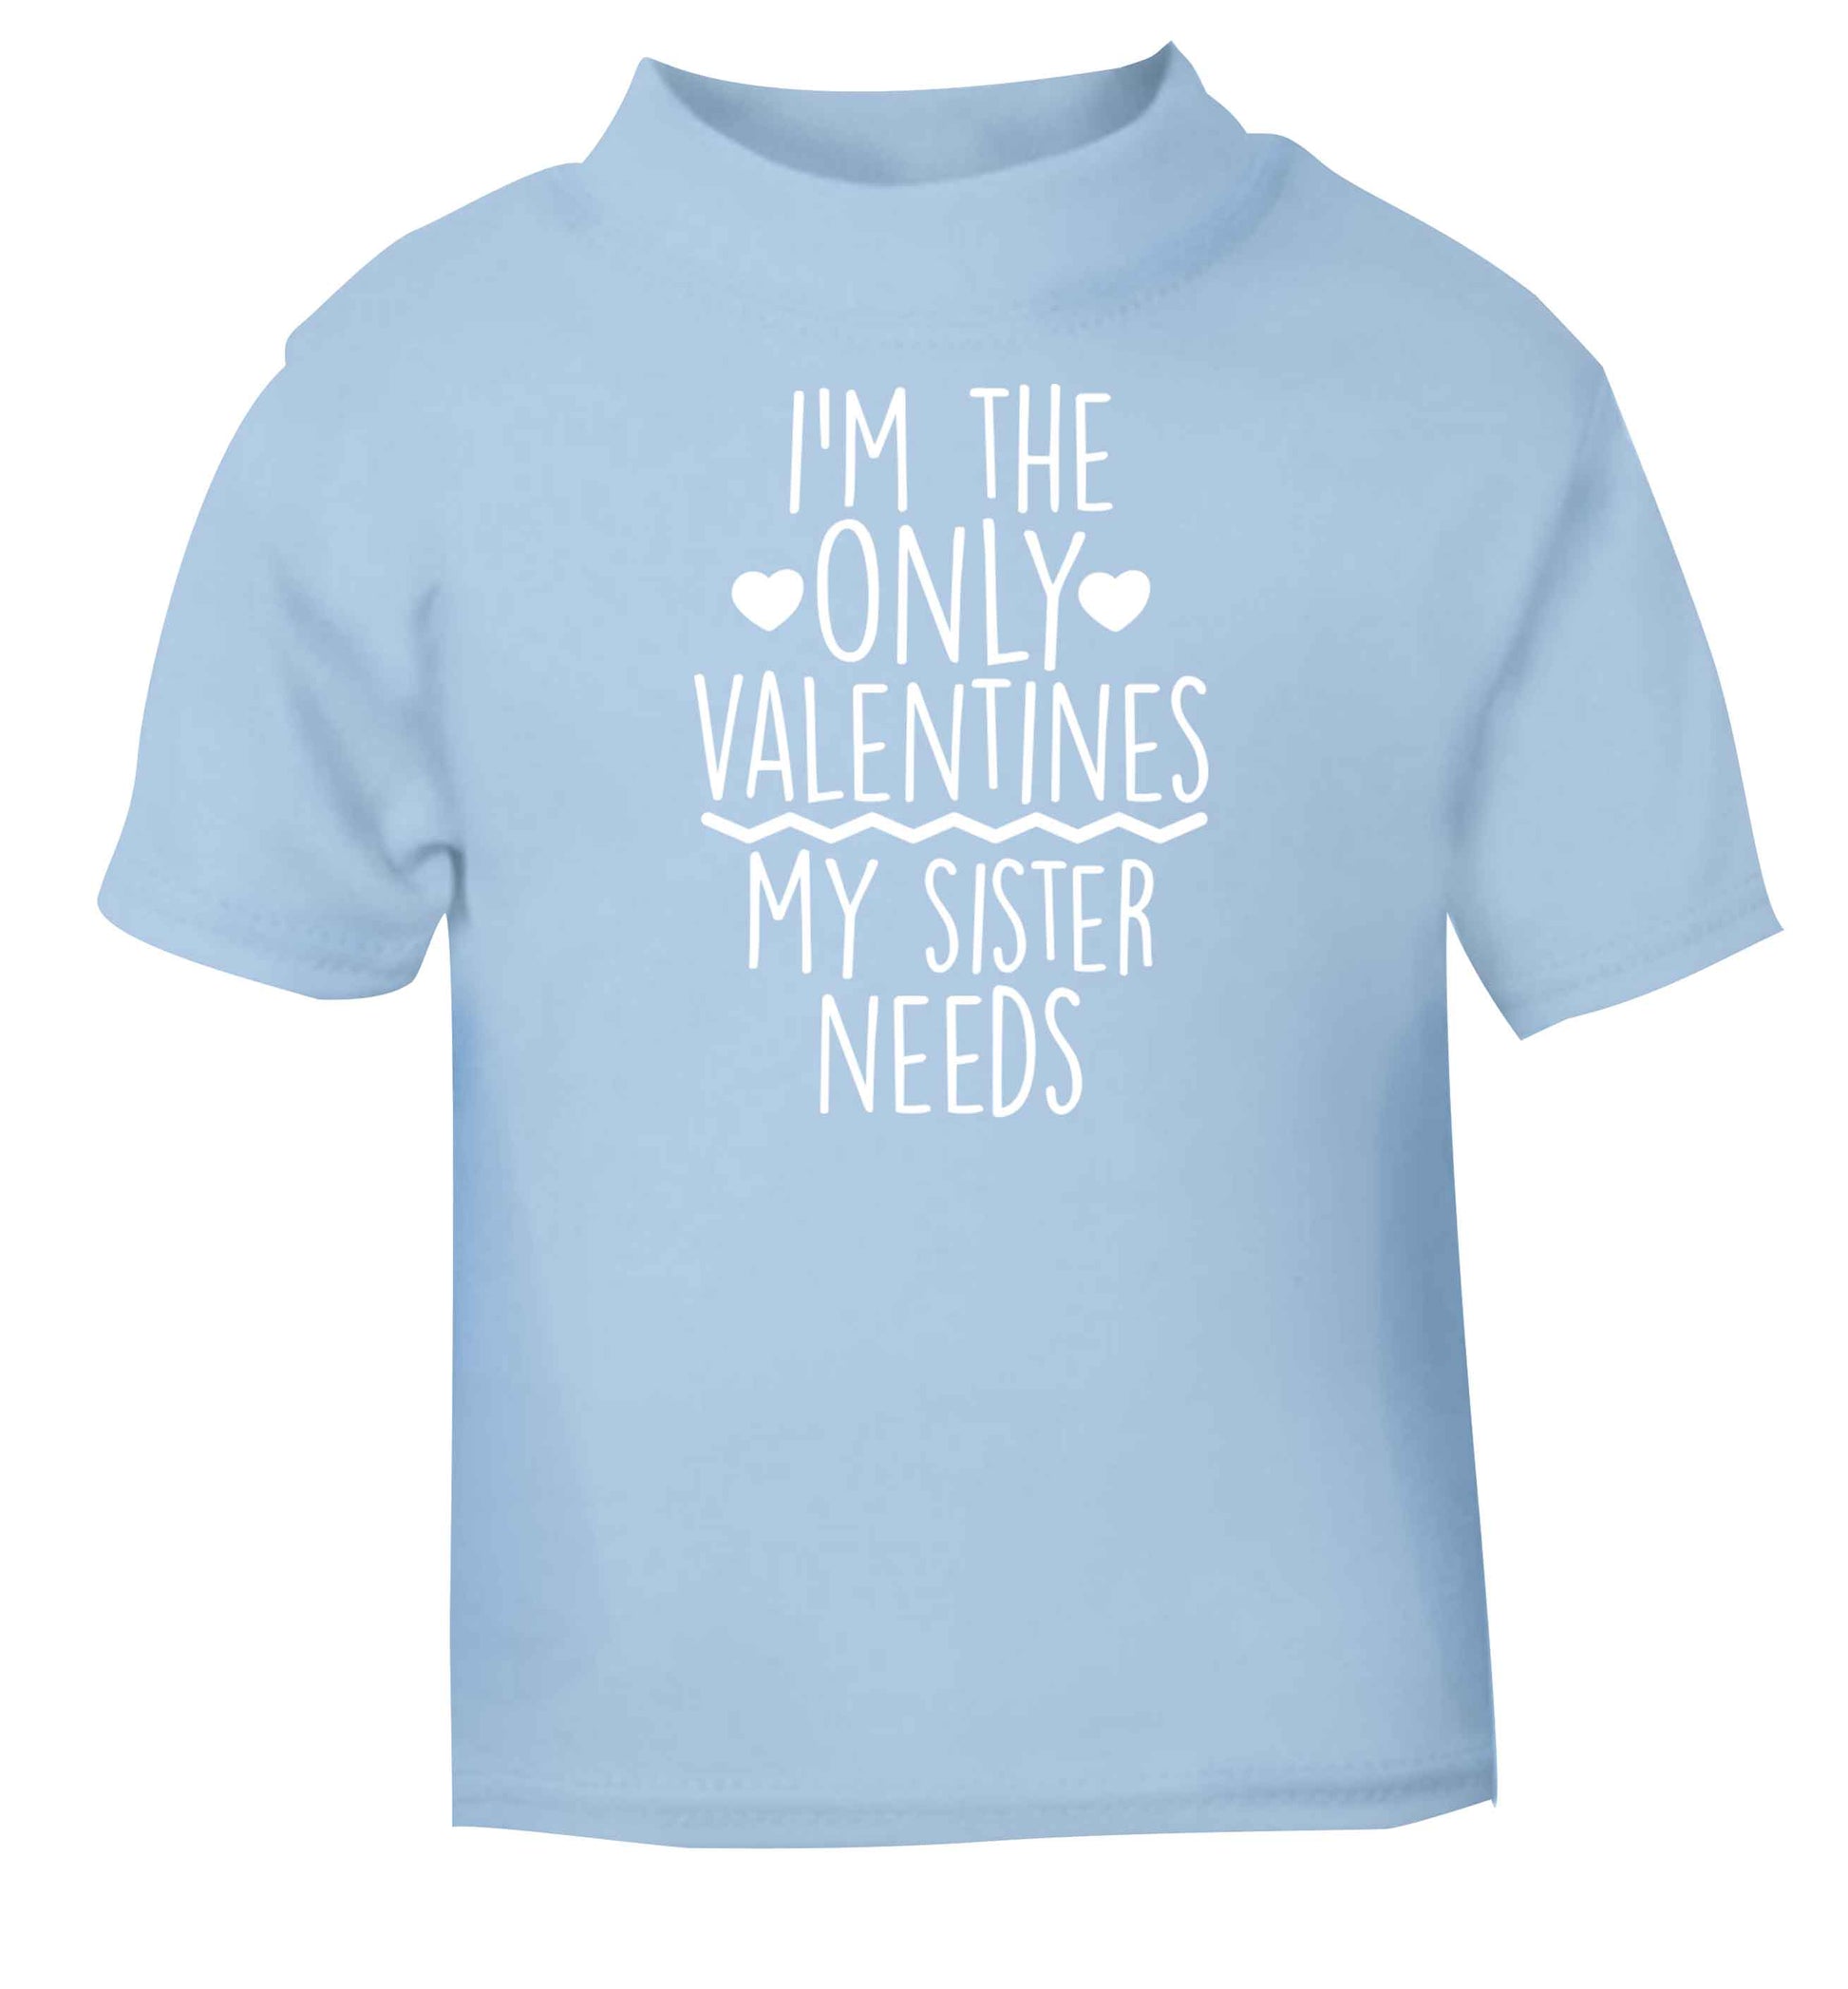 I'm the only valentines my sister needs light blue baby toddler Tshirt 2 Years